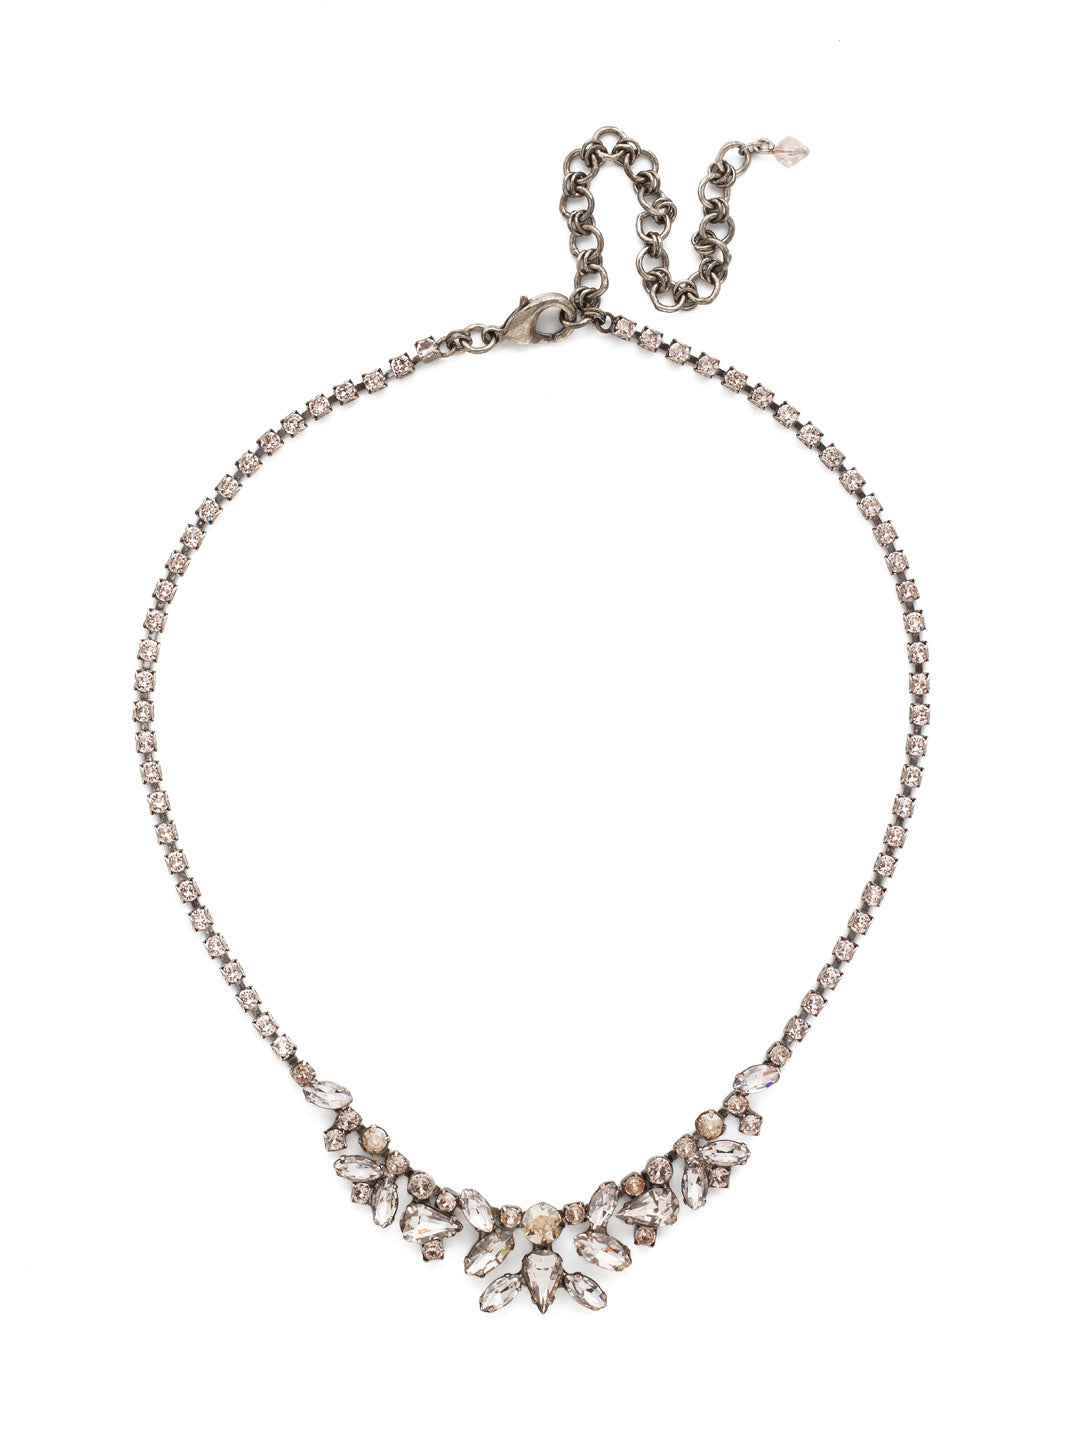 Cluster Bib Statement Necklace - NDP4ASSBL - <p>This bib necklace features a floral inspired crystal design. From Sorrelli's Satin Blush collection in our Antique Silver-tone finish.</p>